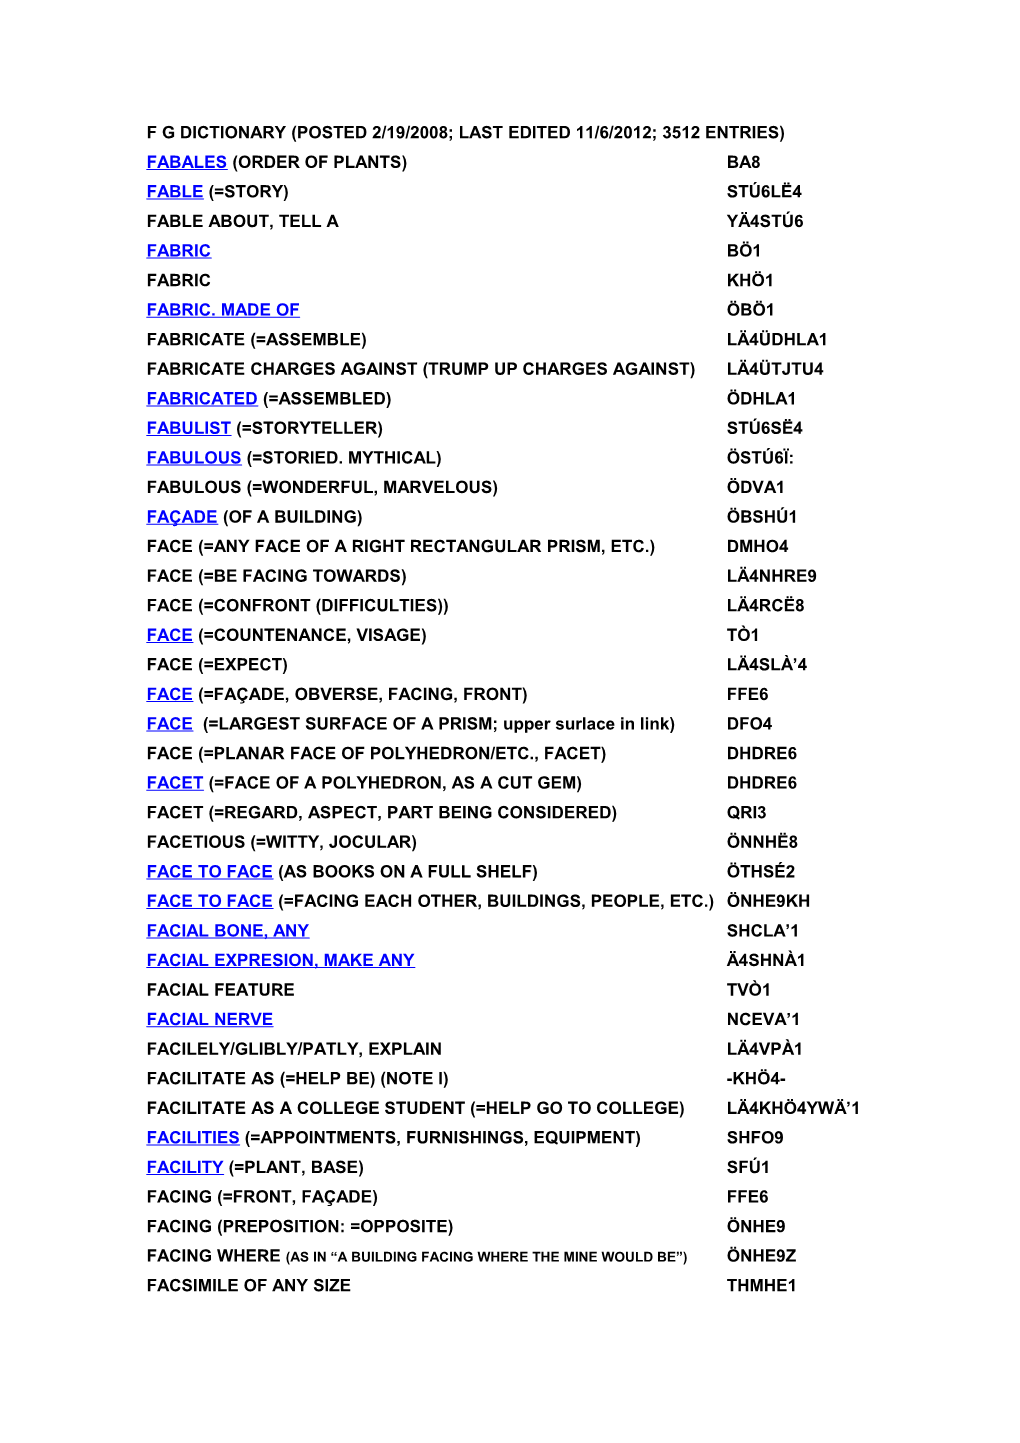 F G Dictionary (Posted 2/19/2008; Last Edited 1/30/2009; 3108 Entries)